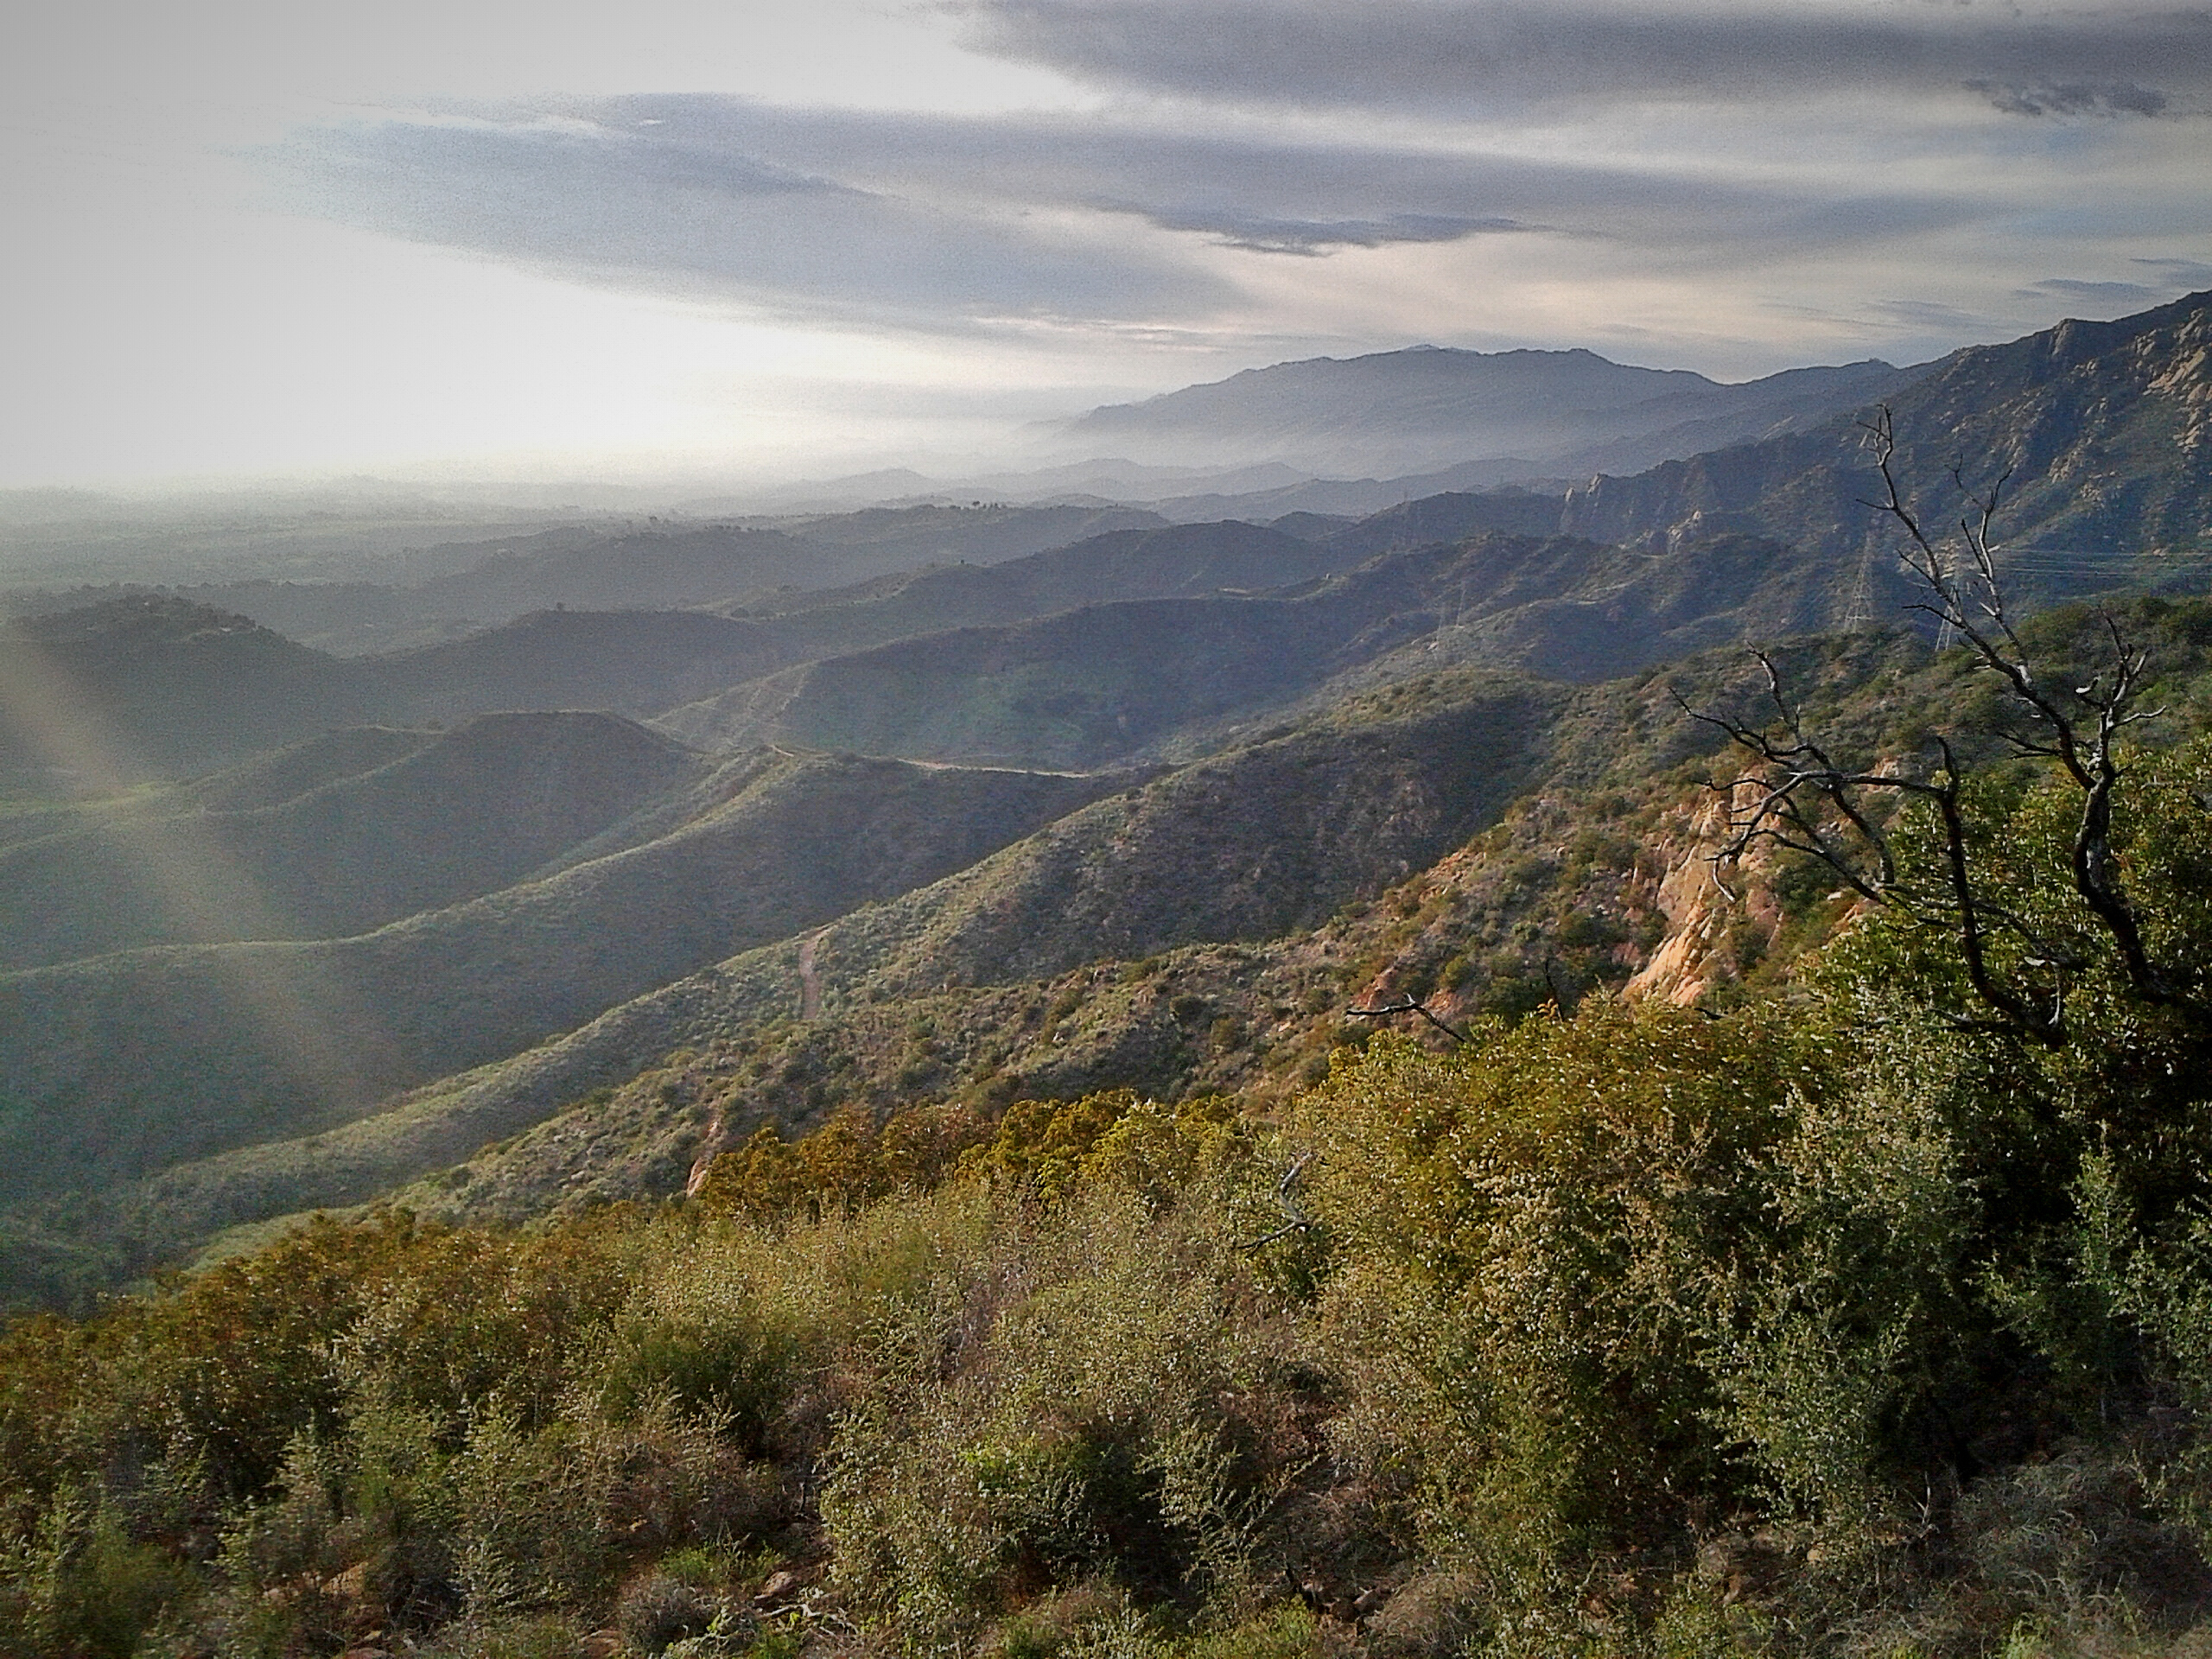 HIKING ADVENTURES IN L.A.